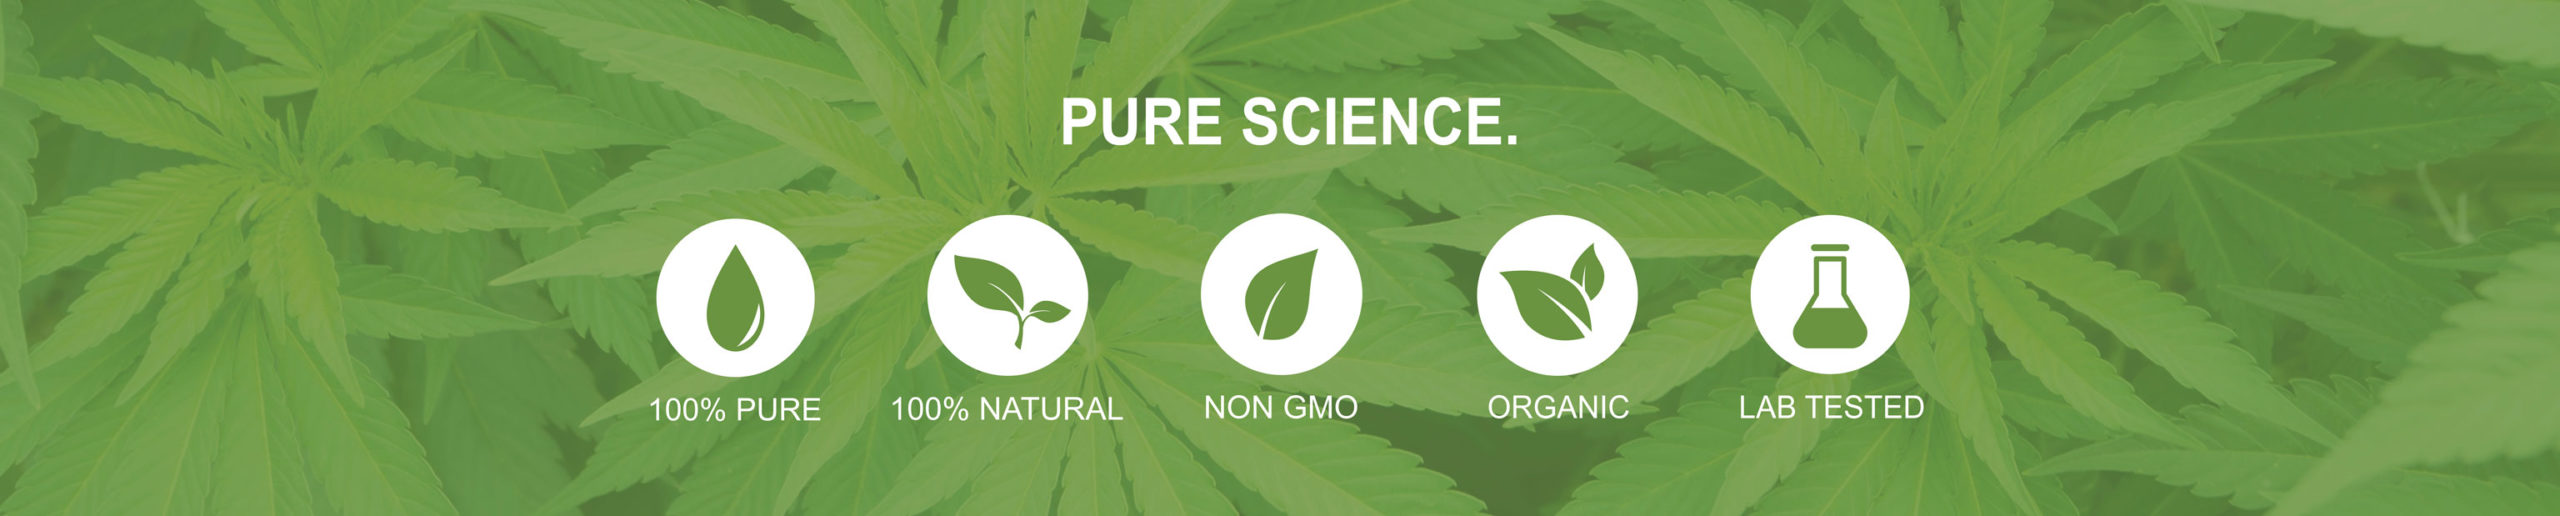 Pure Science Home Page Banner